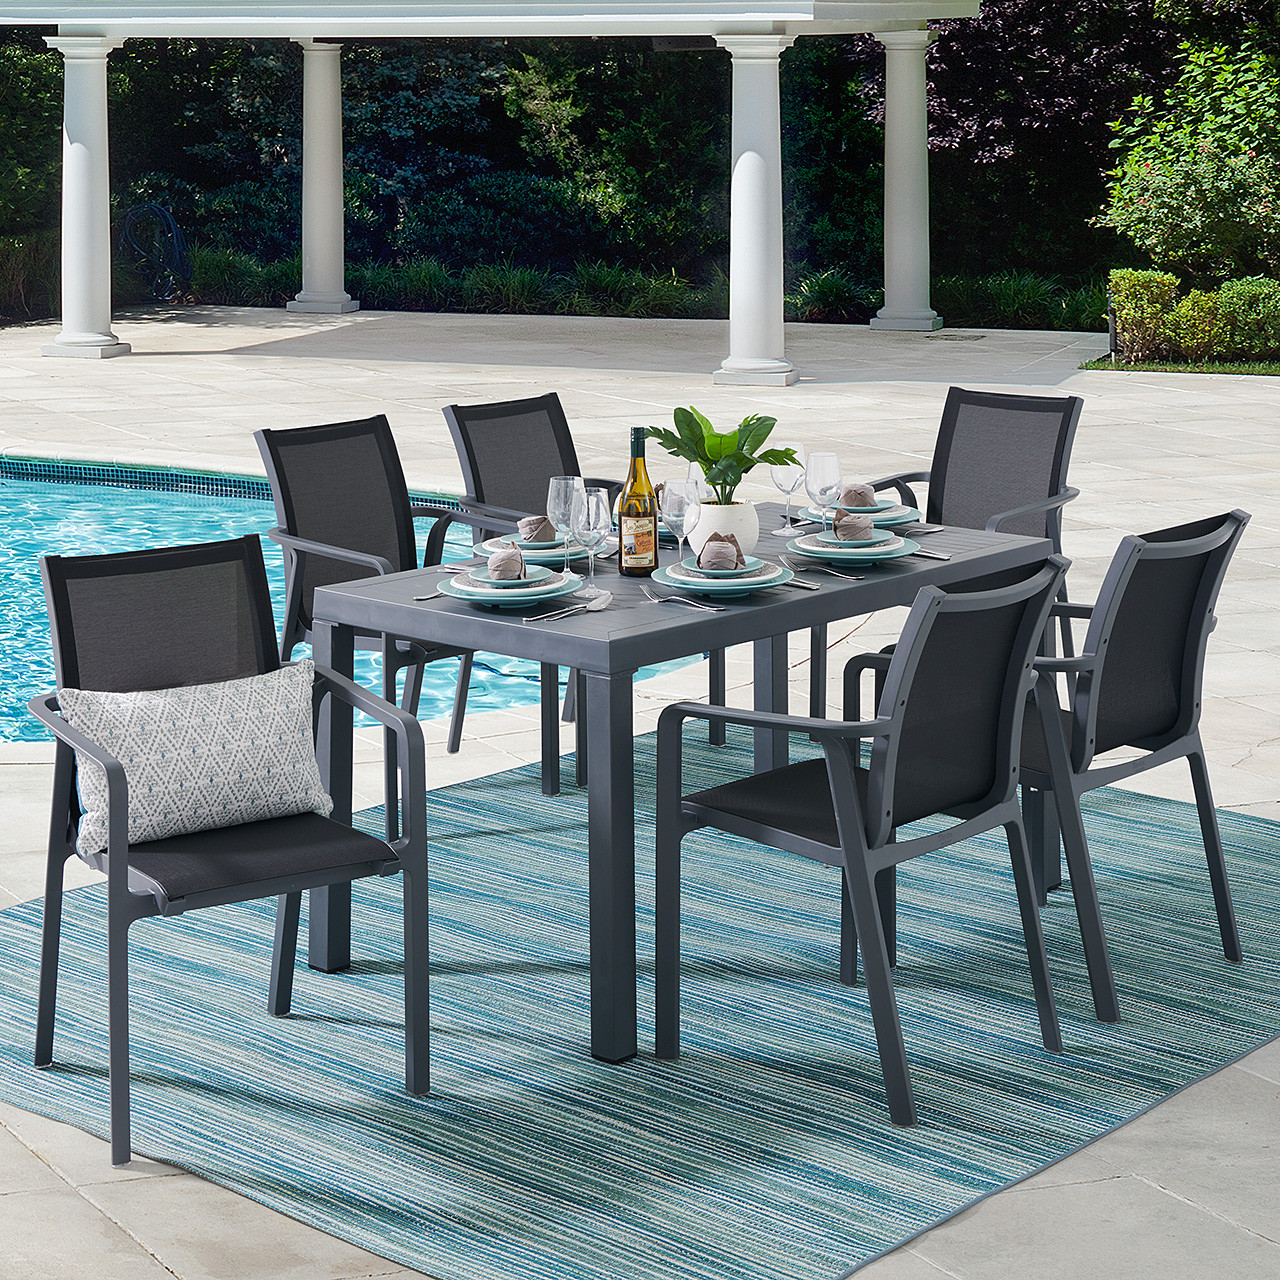 Pacifica Dark Grey Polypropylene and Black Sling 7 Pc. Dining Set with 55 x 35 in. Table